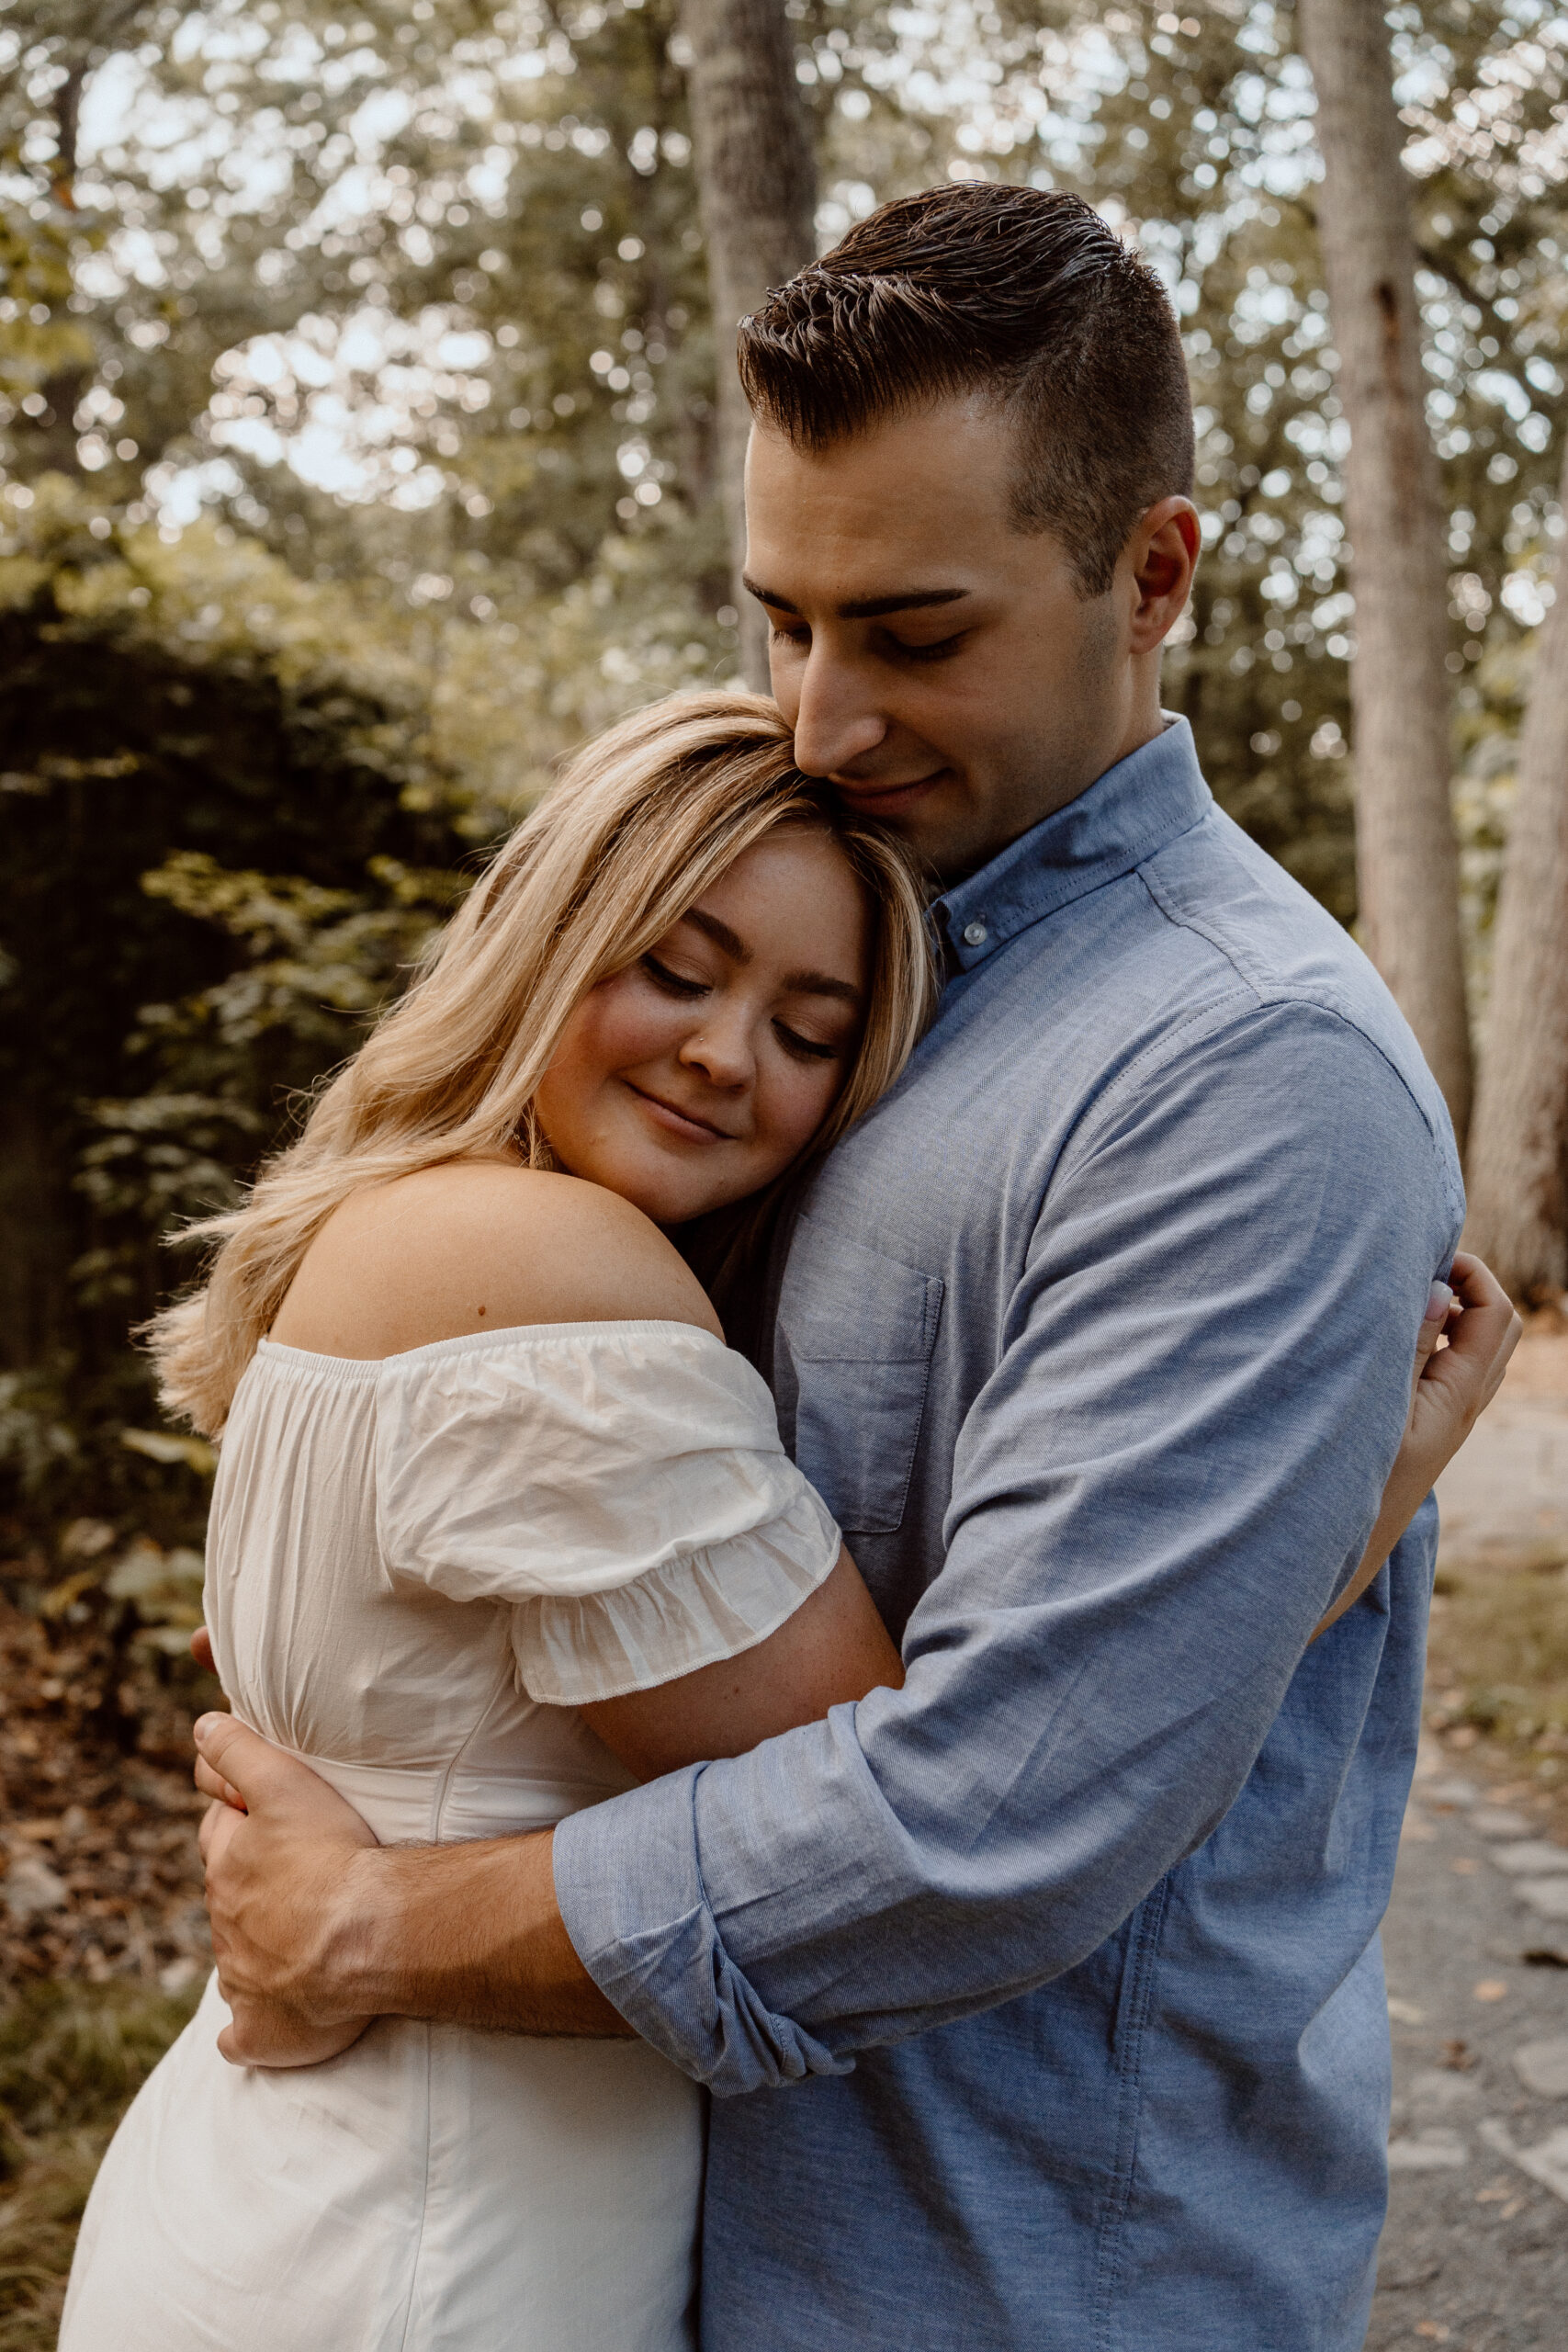 Romantic engagement photography at Garden in the Woods, Framingham, MA, featuring a loving couple amidst the enchanting scenery of this renowned botanical garden.